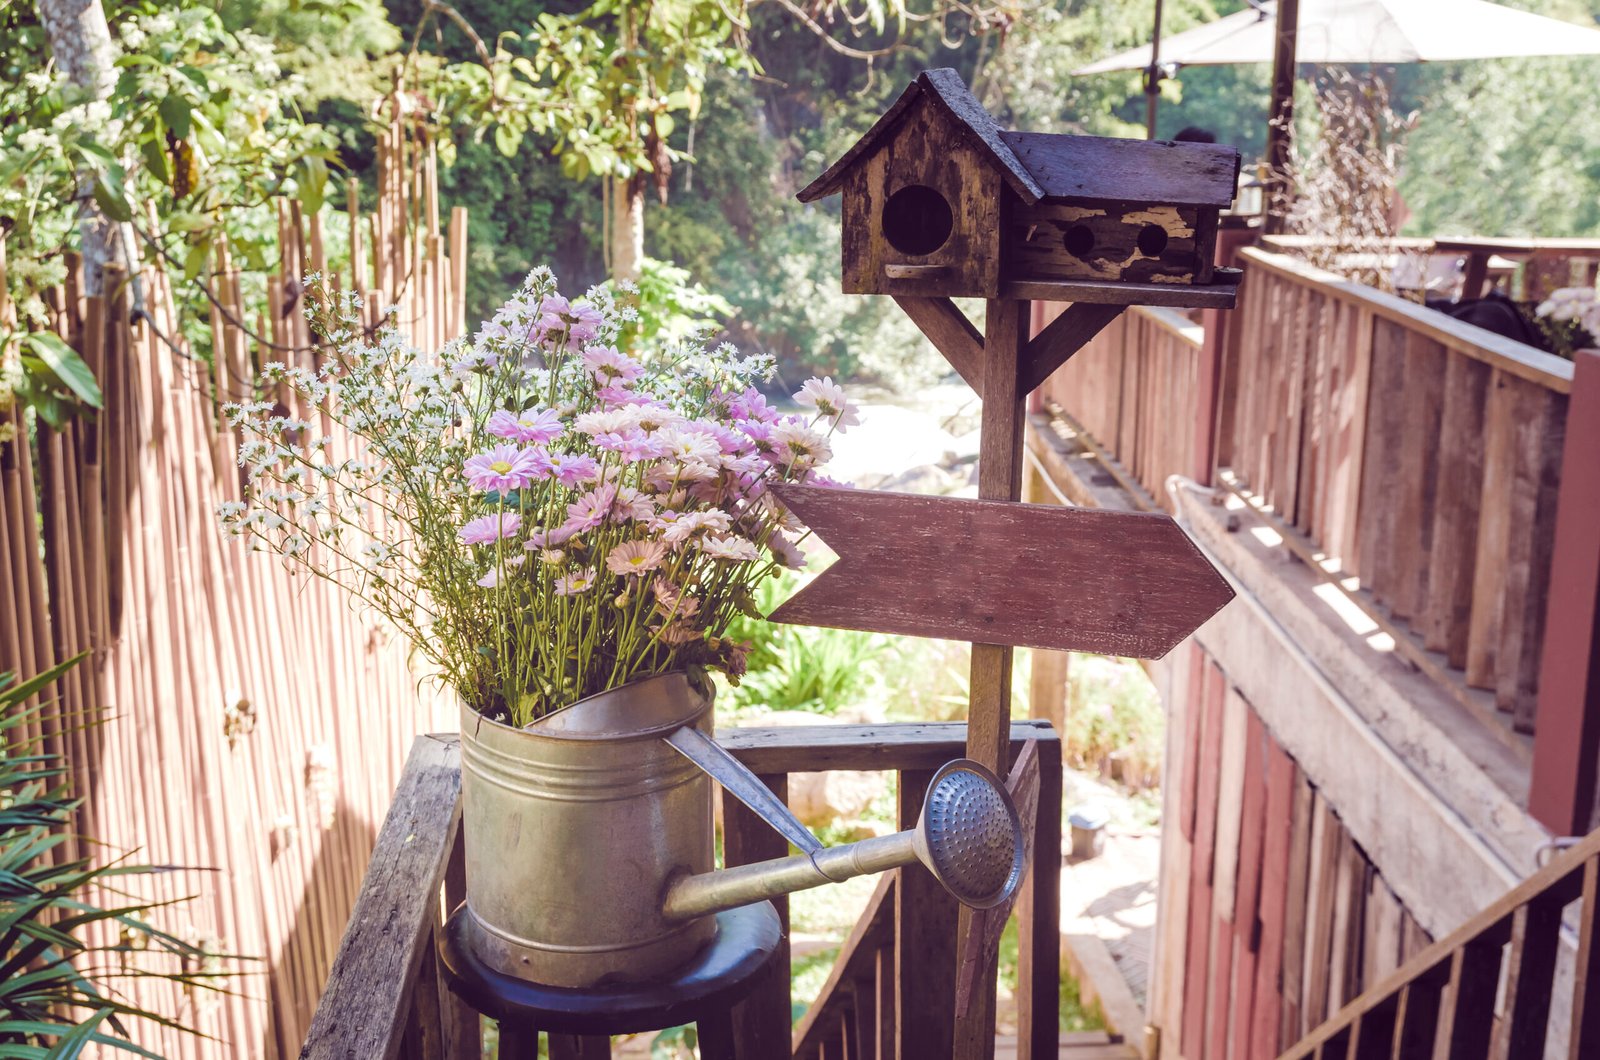 Vintage style of flower in a watering can.